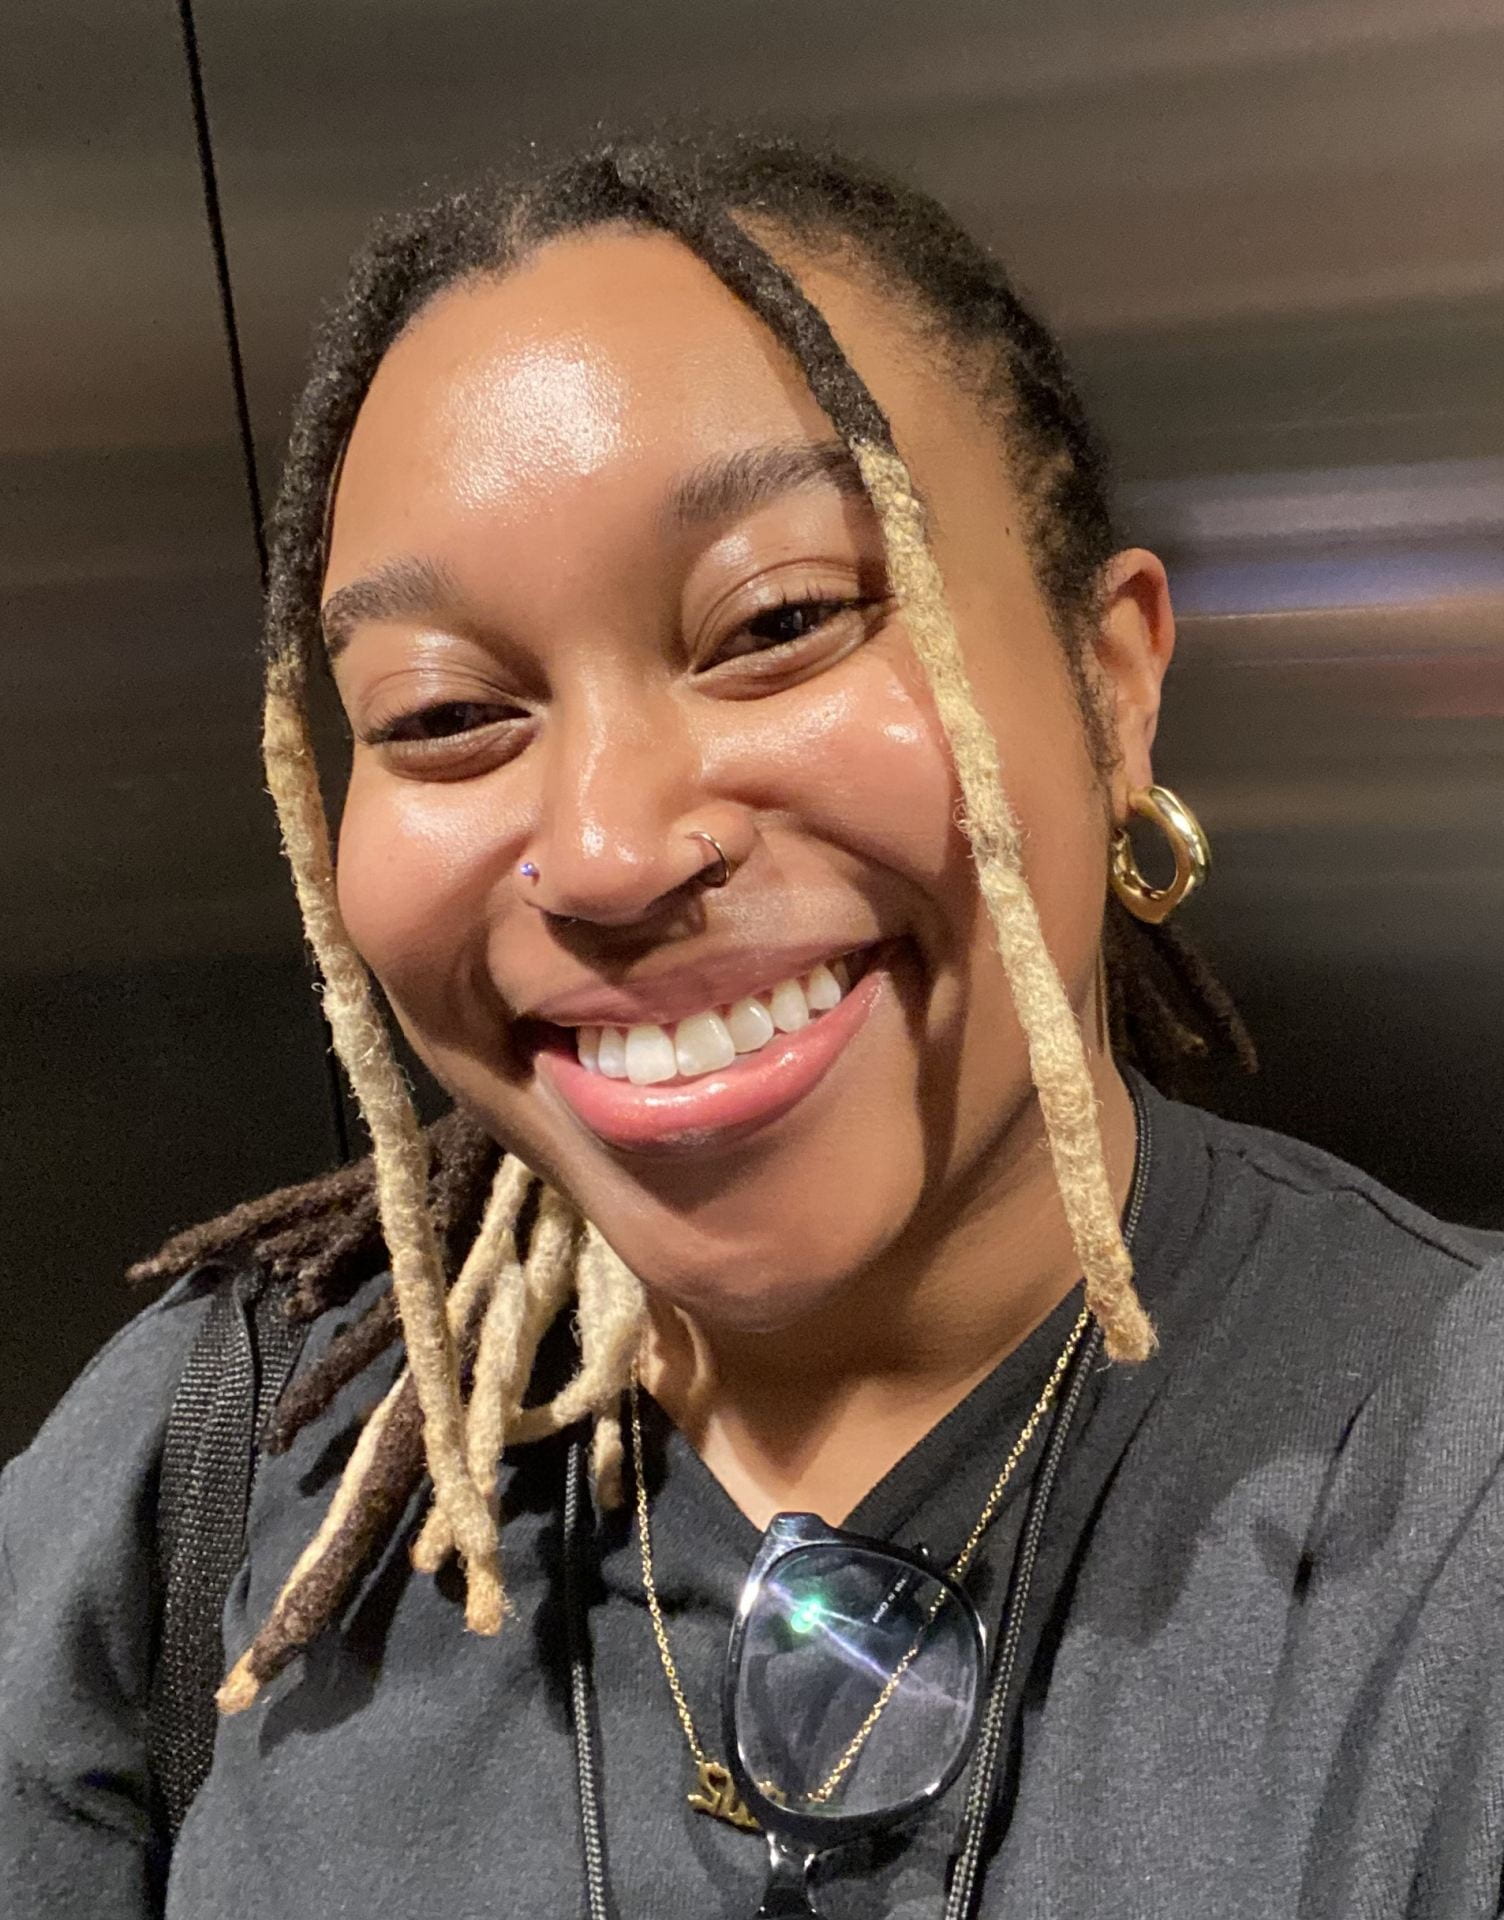 a smiling young woman with blond dreads.